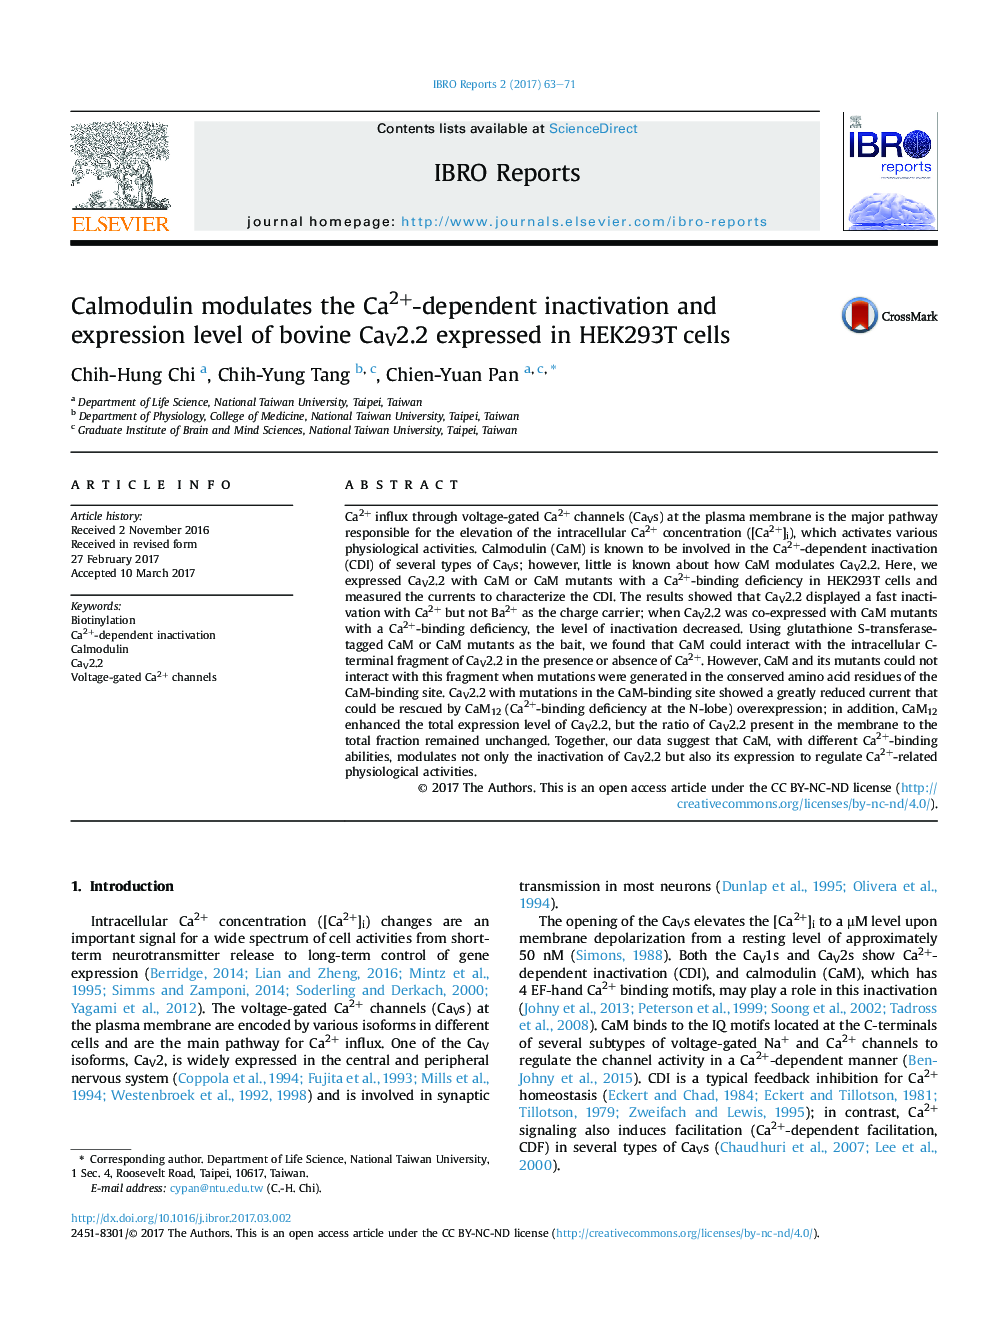 Calmodulin modulates the Ca2+-dependent inactivation and expression level of bovine CaV2.2 expressed in HEK293T cells